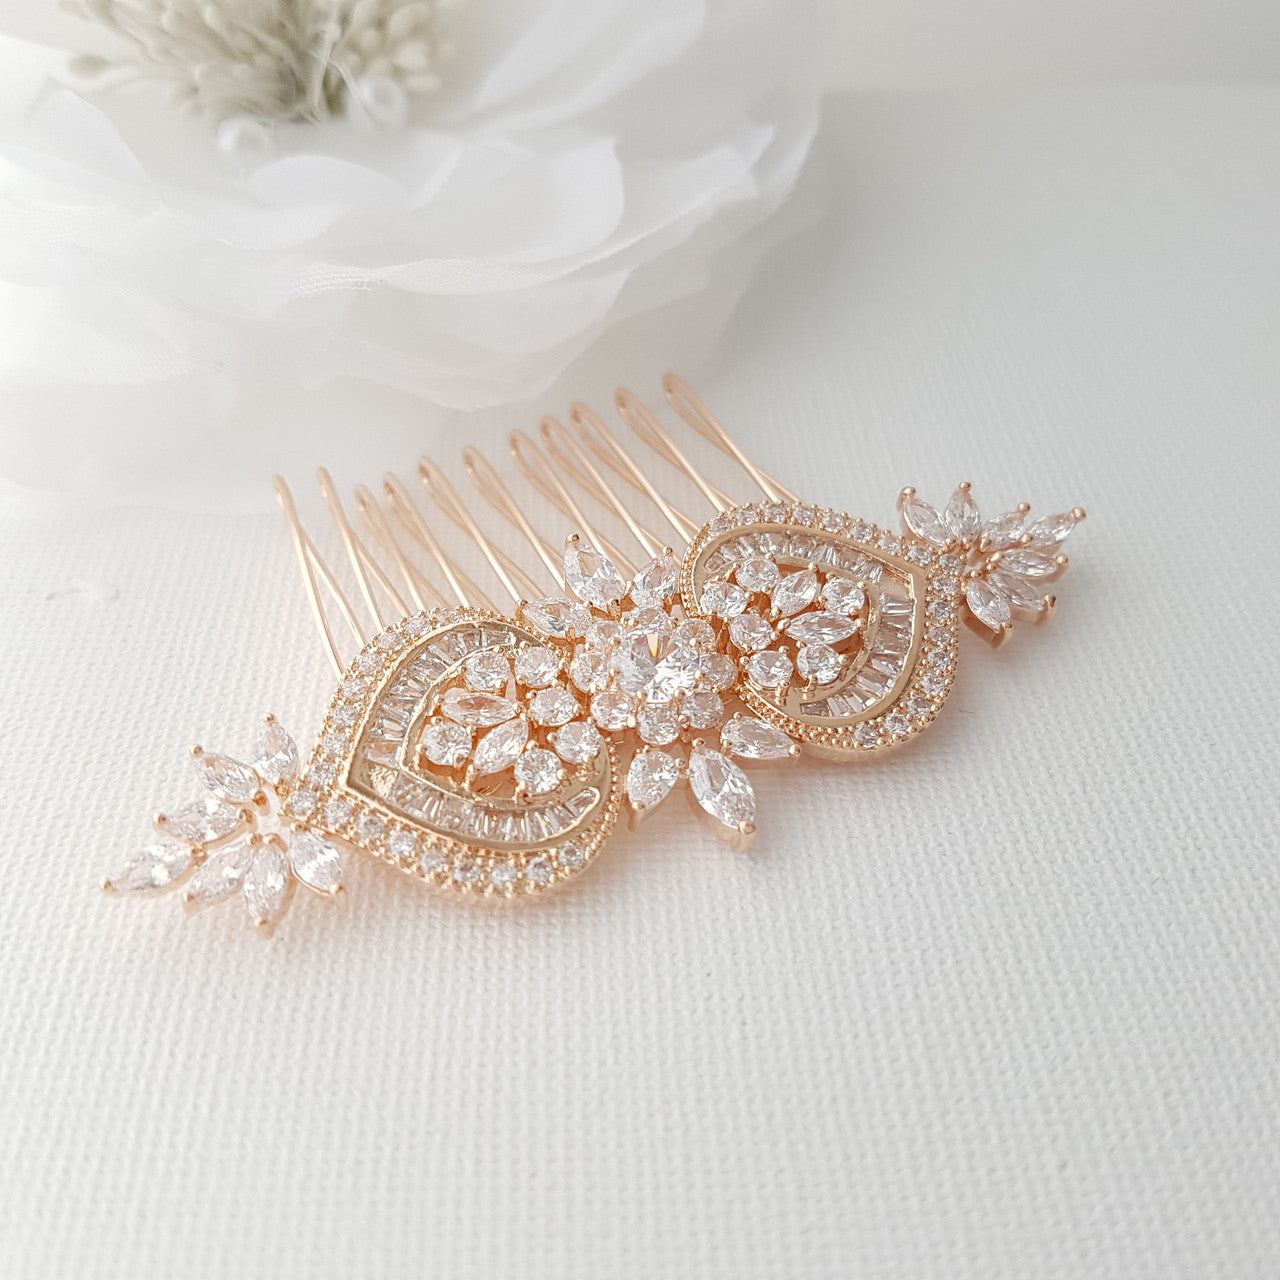 Gold Hair Comb, Wedding Hair Comb, Pearl Bridal Hair Piece, Crystal Rose Gold Headpiece,  Pearls, Bride Hair Jewelry, Rosa